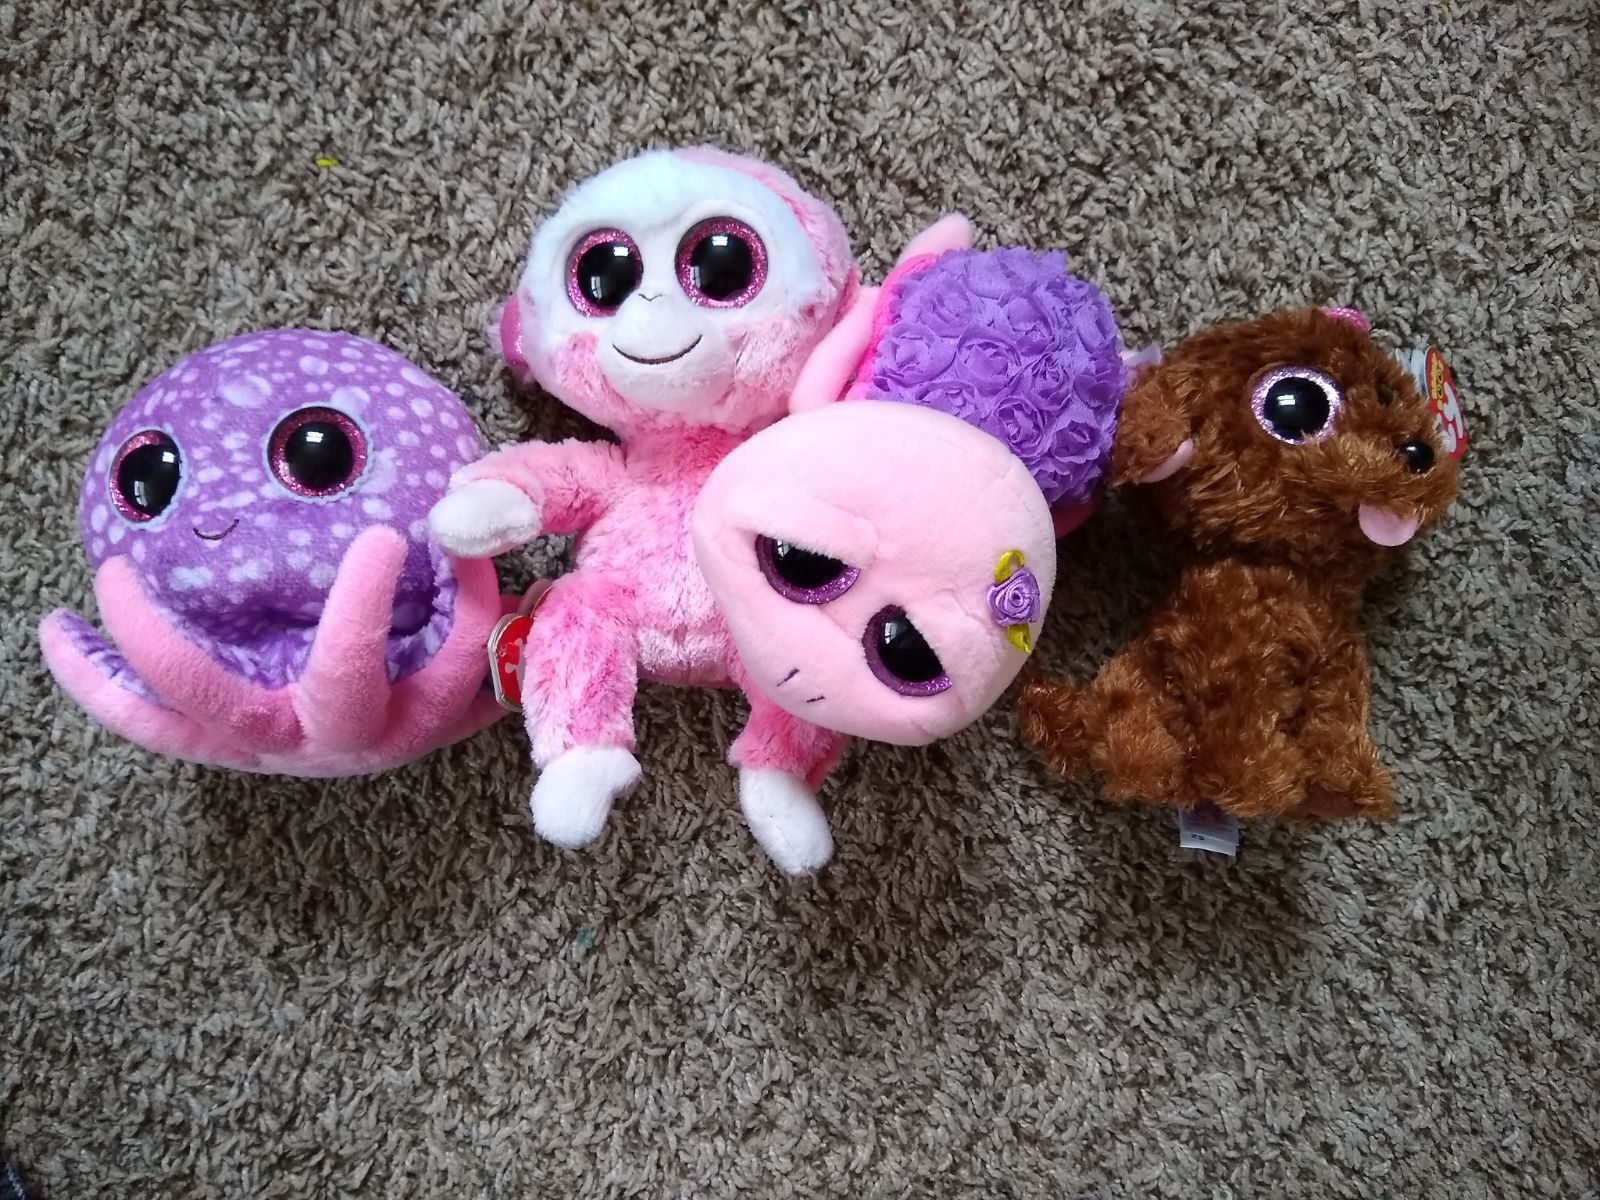 Ty beanie boo plush toys. Missing or damaged hang tags